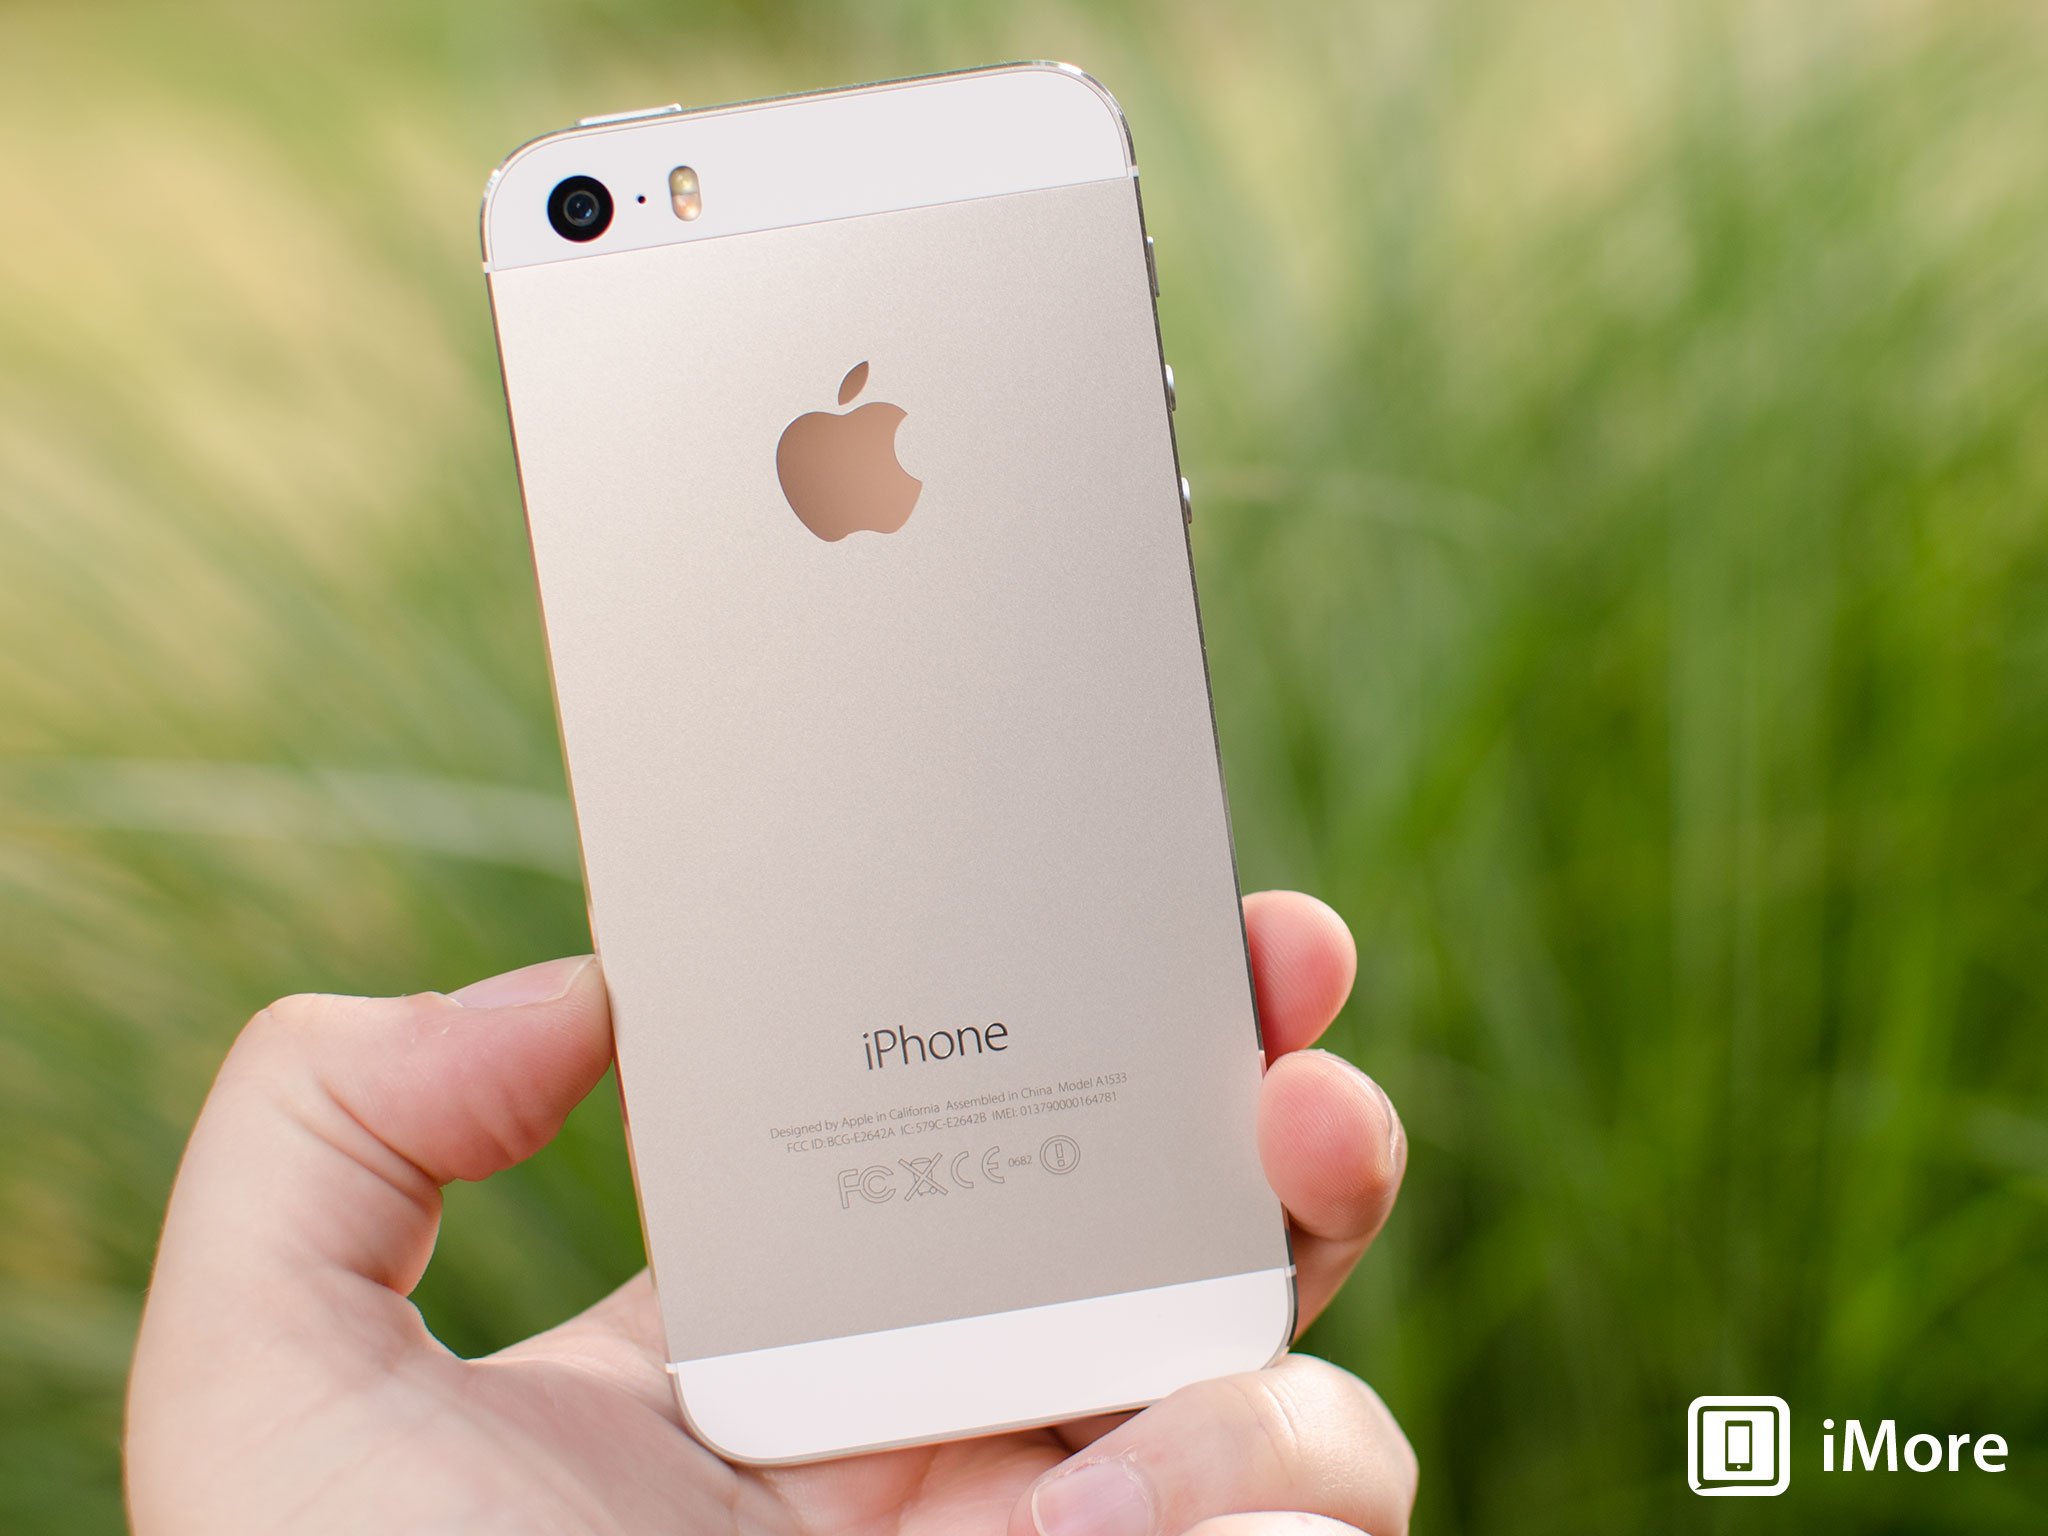 Silver iPhone 5s photo gallery